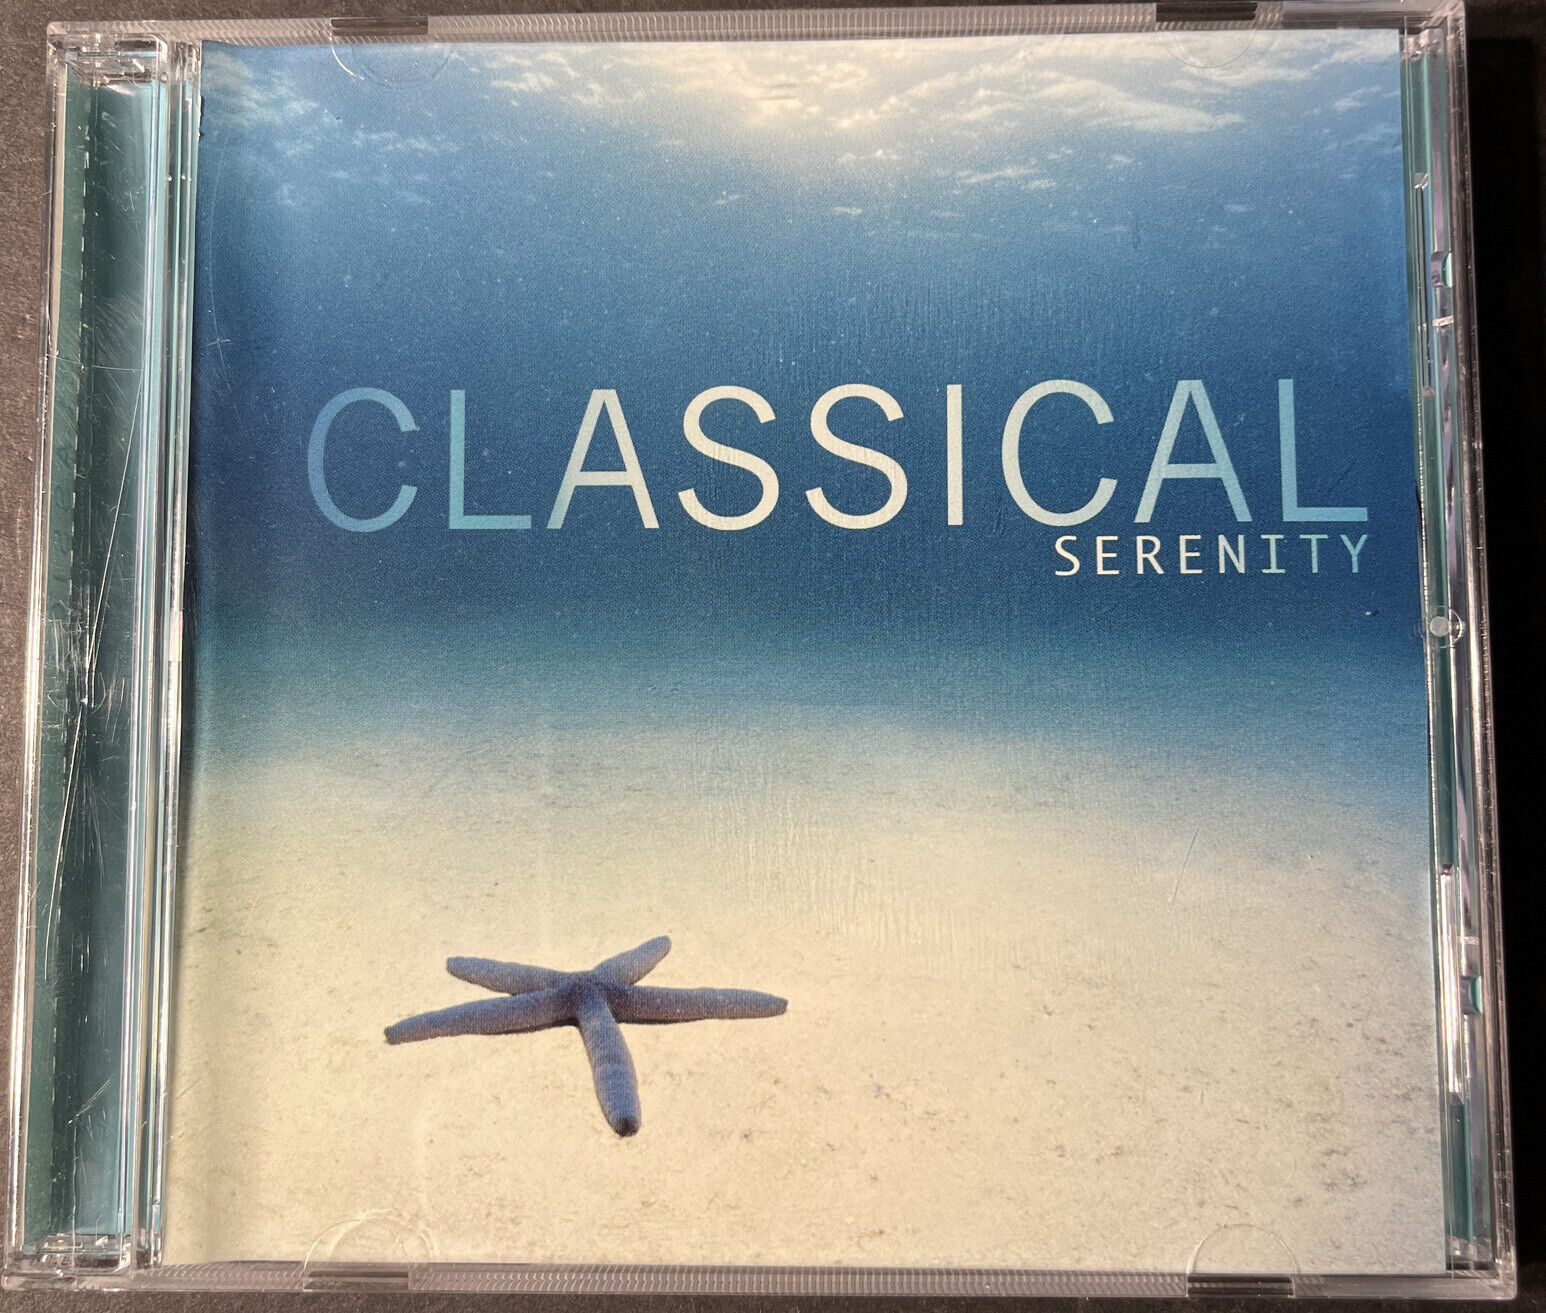 "Classical Serenity" - DigiMusic Compilation CD, Import, China,  2005, Classical | eBay